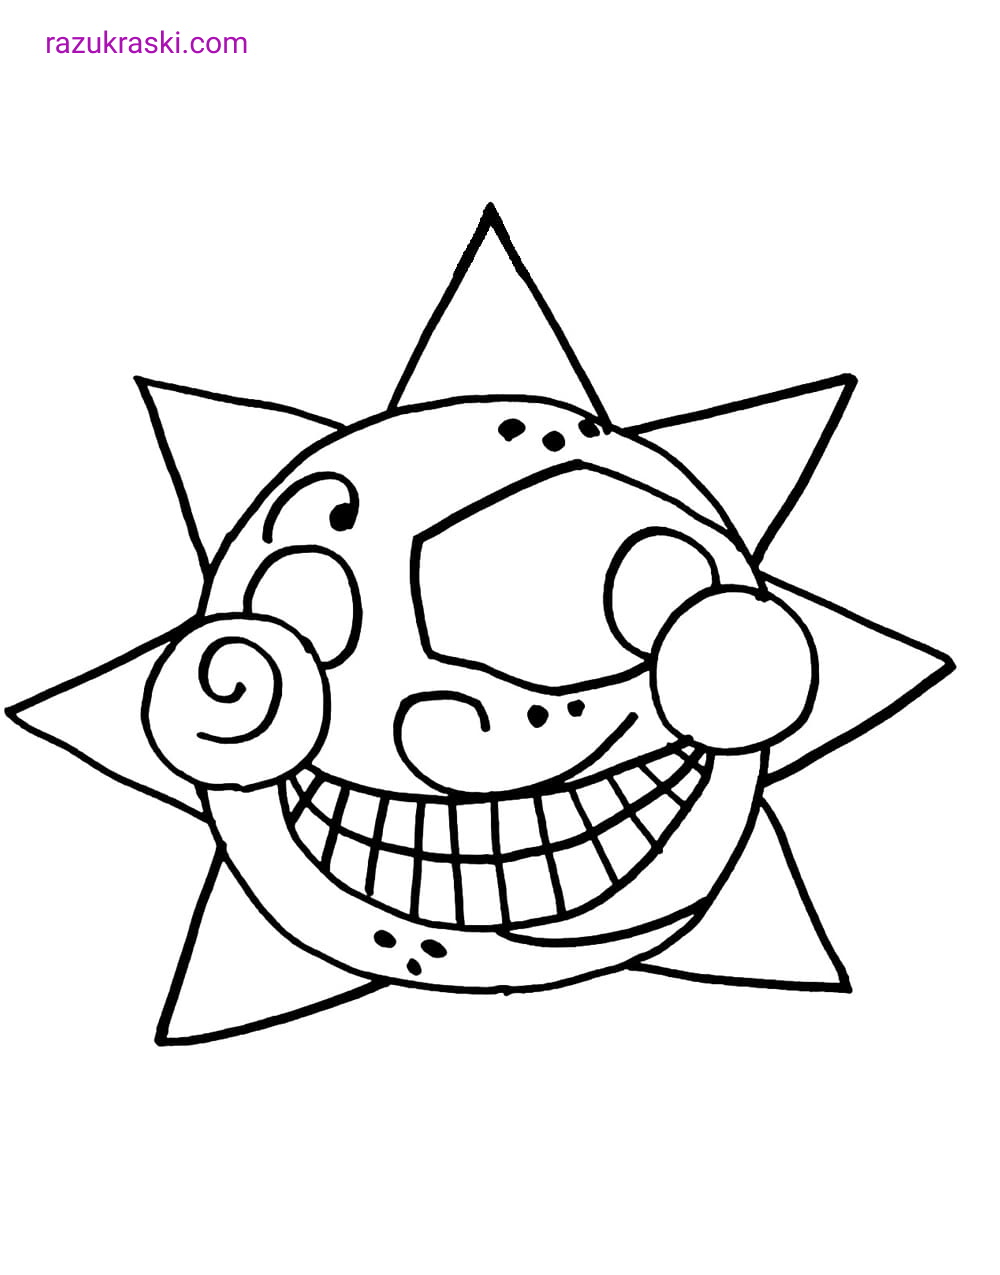 Coloring page FNAF Sun - face